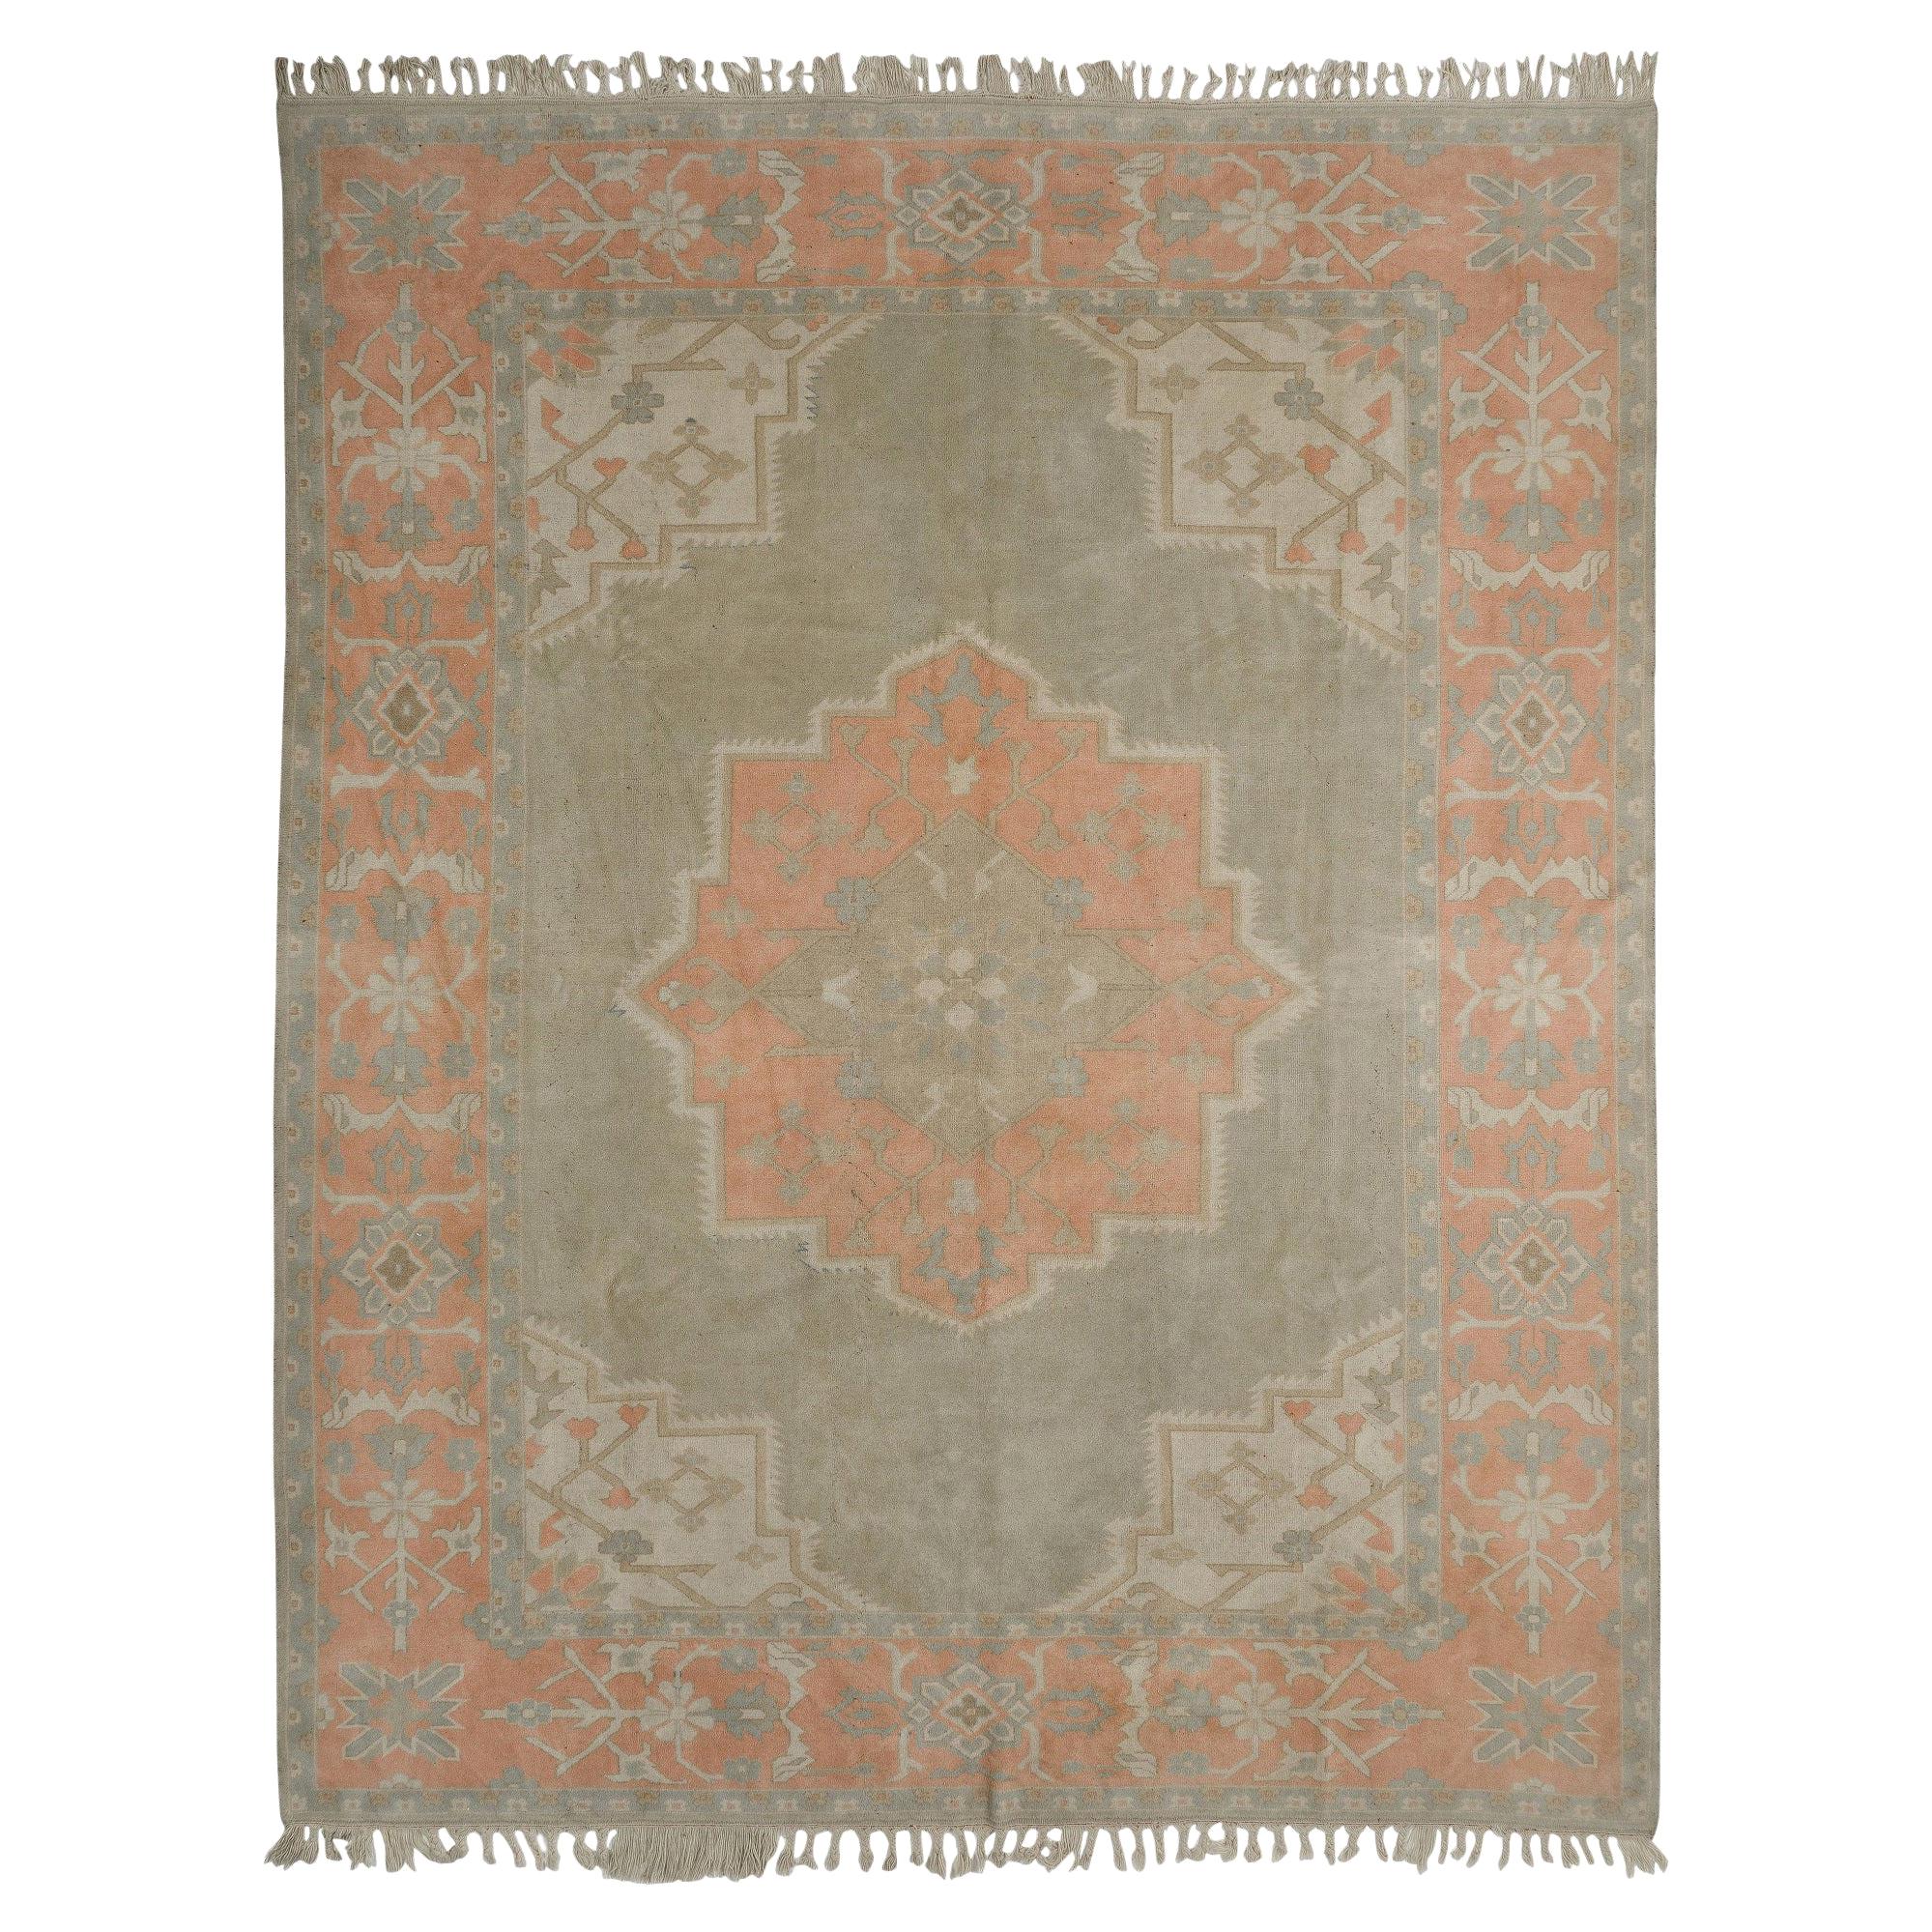 10x12.4 Ft Midcentury One-of-a-Kind Oushak Wool Rug in Soft Colors, Natural Dyes